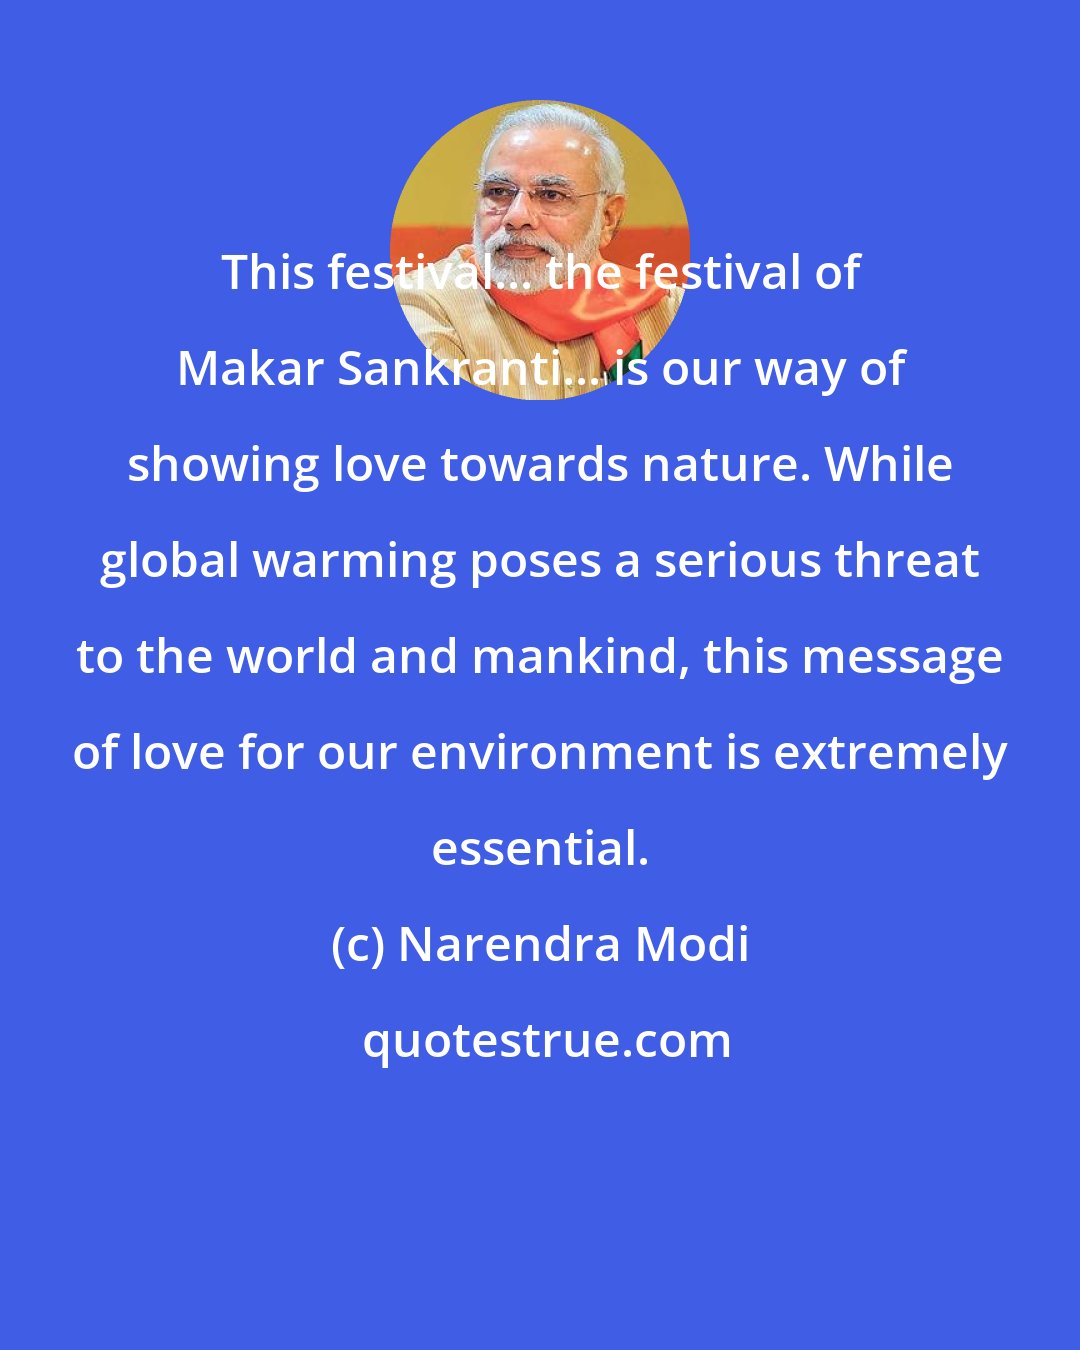 Narendra Modi: This festival... the festival of Makar Sankranti... is our way of showing love towards nature. While global warming poses a serious threat to the world and mankind, this message of love for our environment is extremely essential.